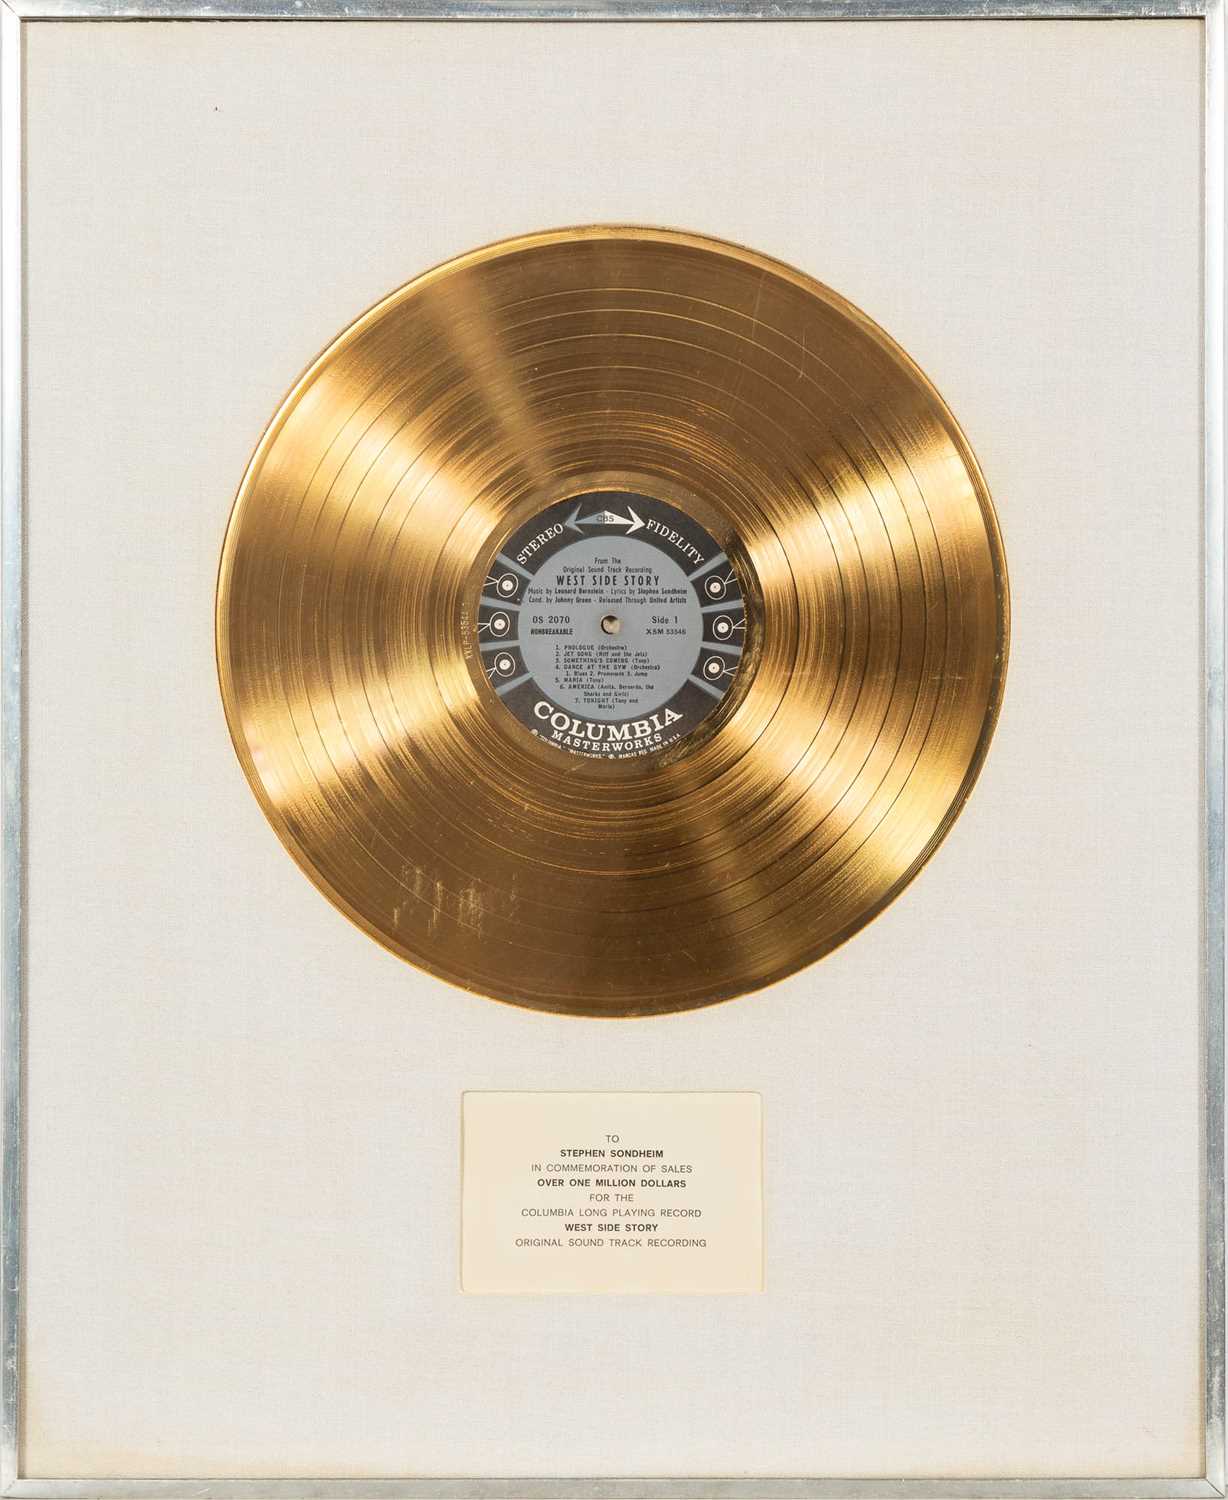 Lot Stephen Sondheim's Gold Record for the soundtrack to West Side Story